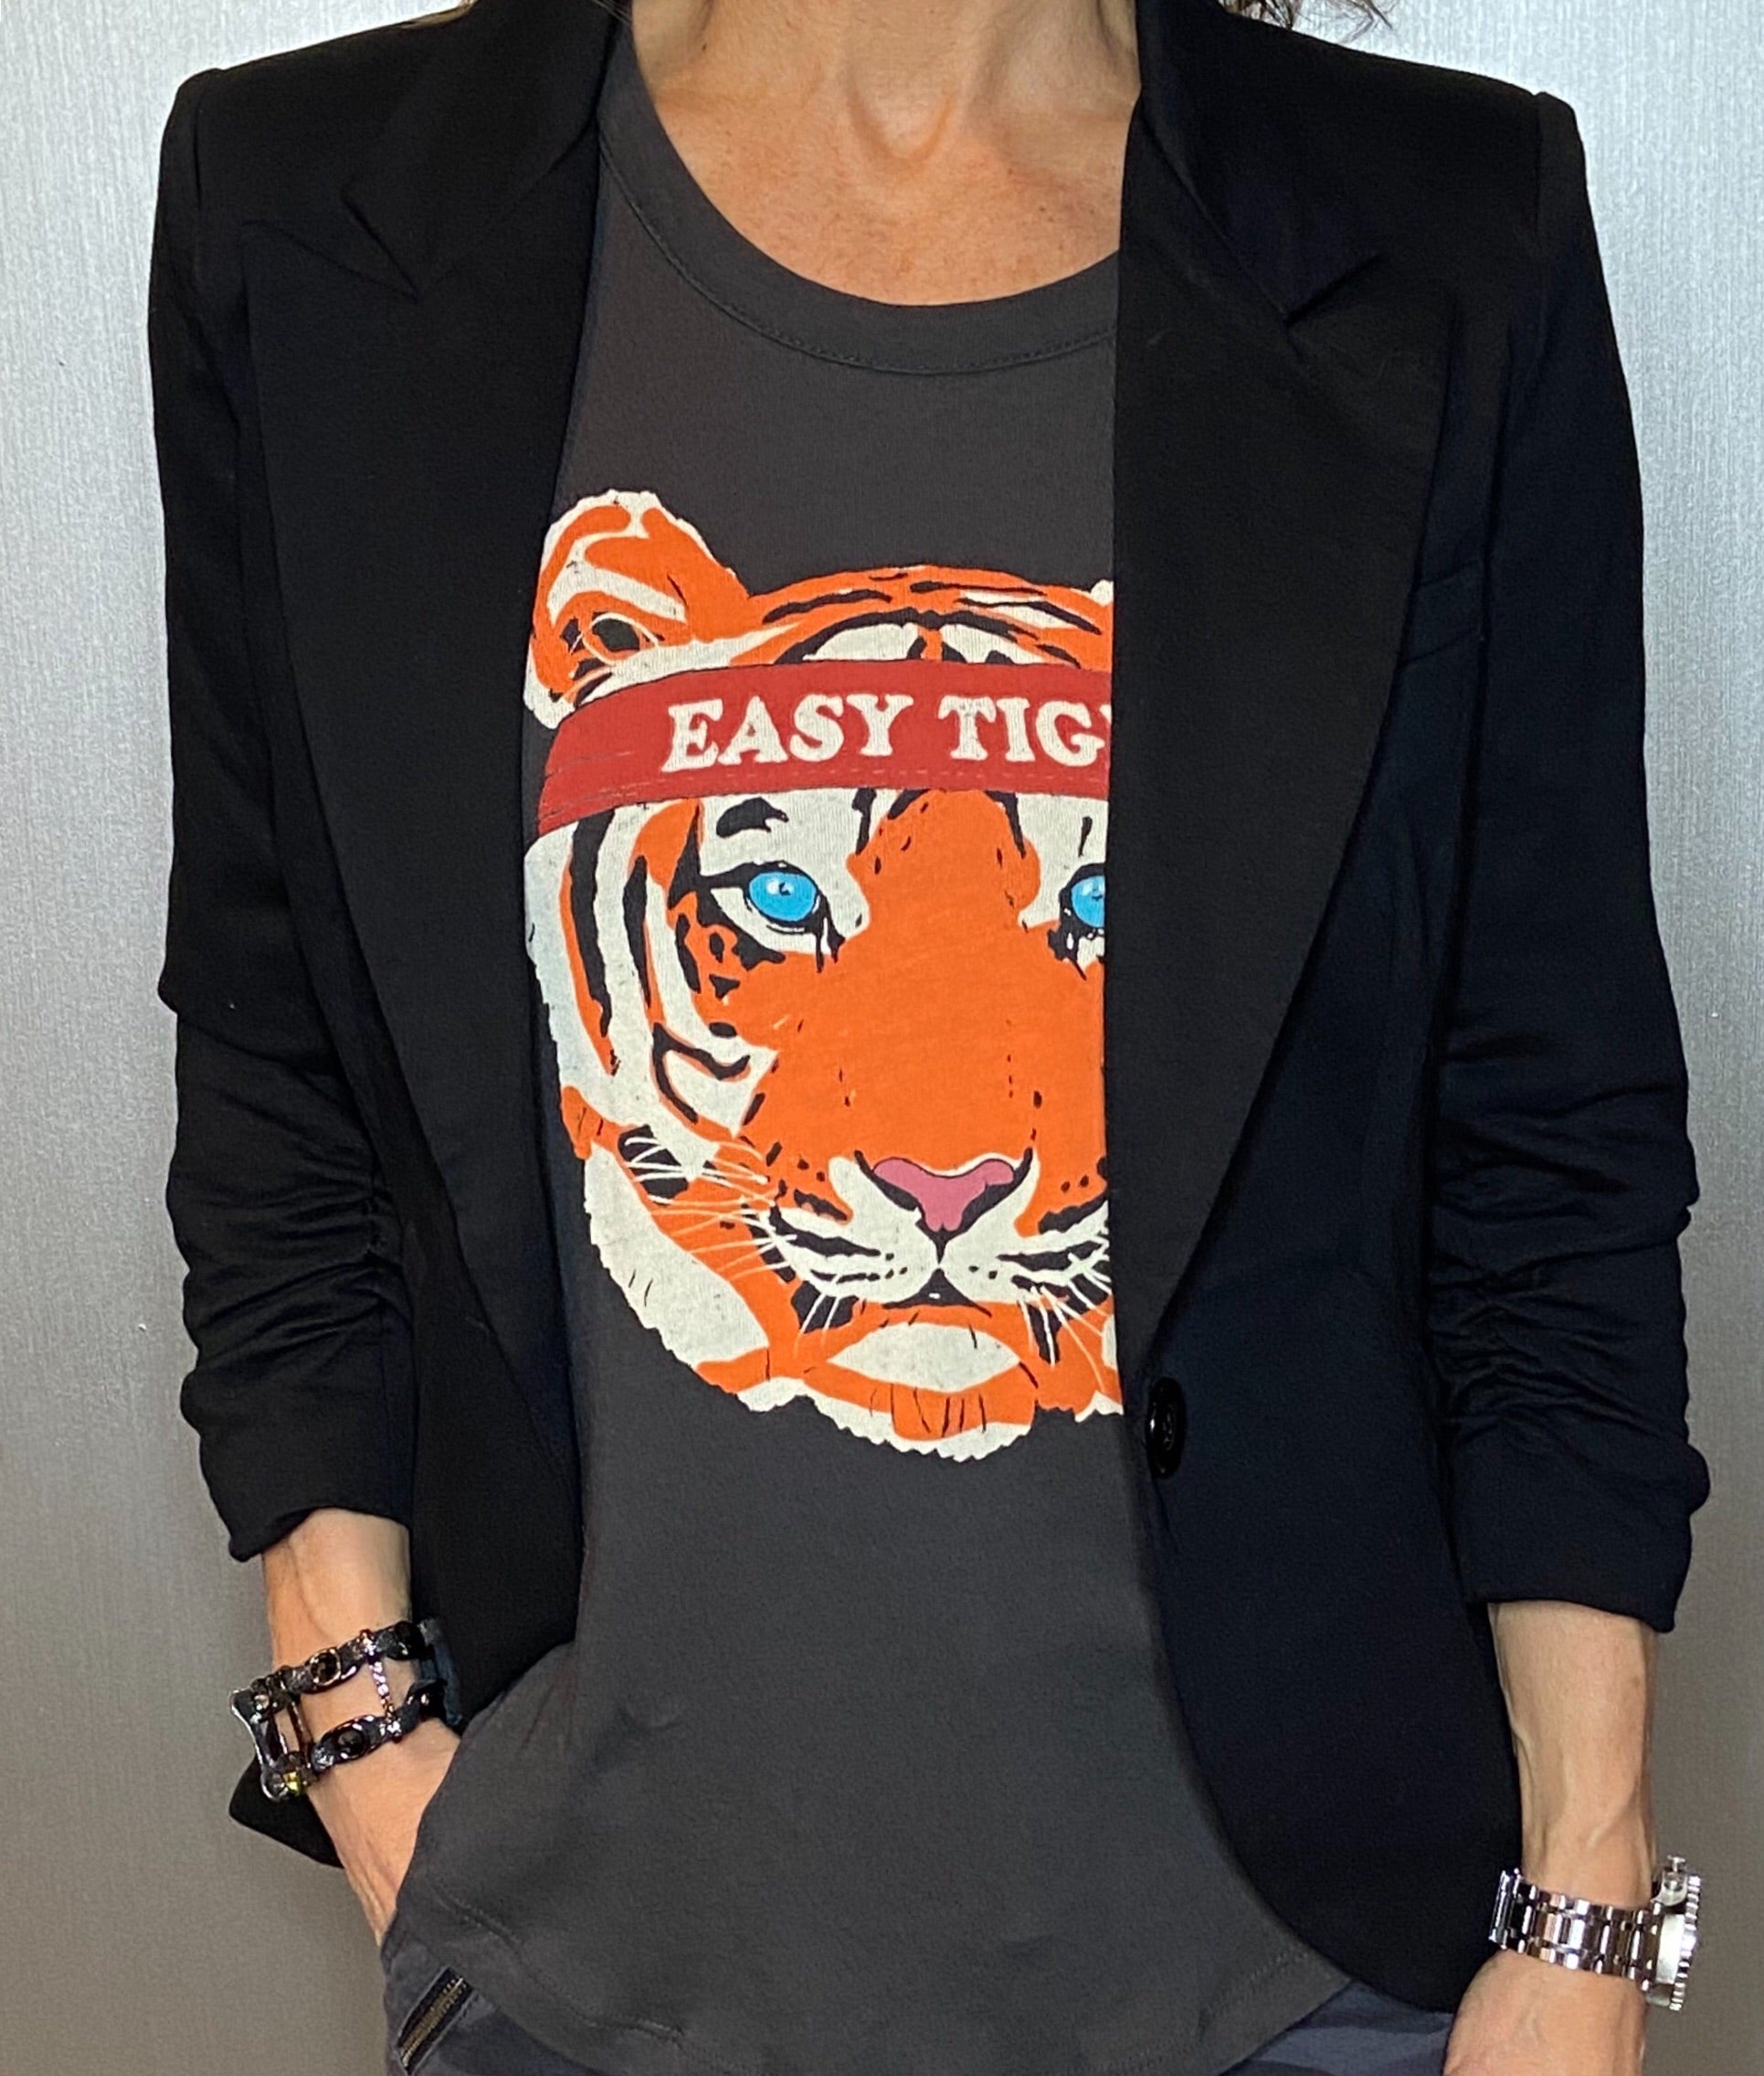 Easy tiger graphic tank